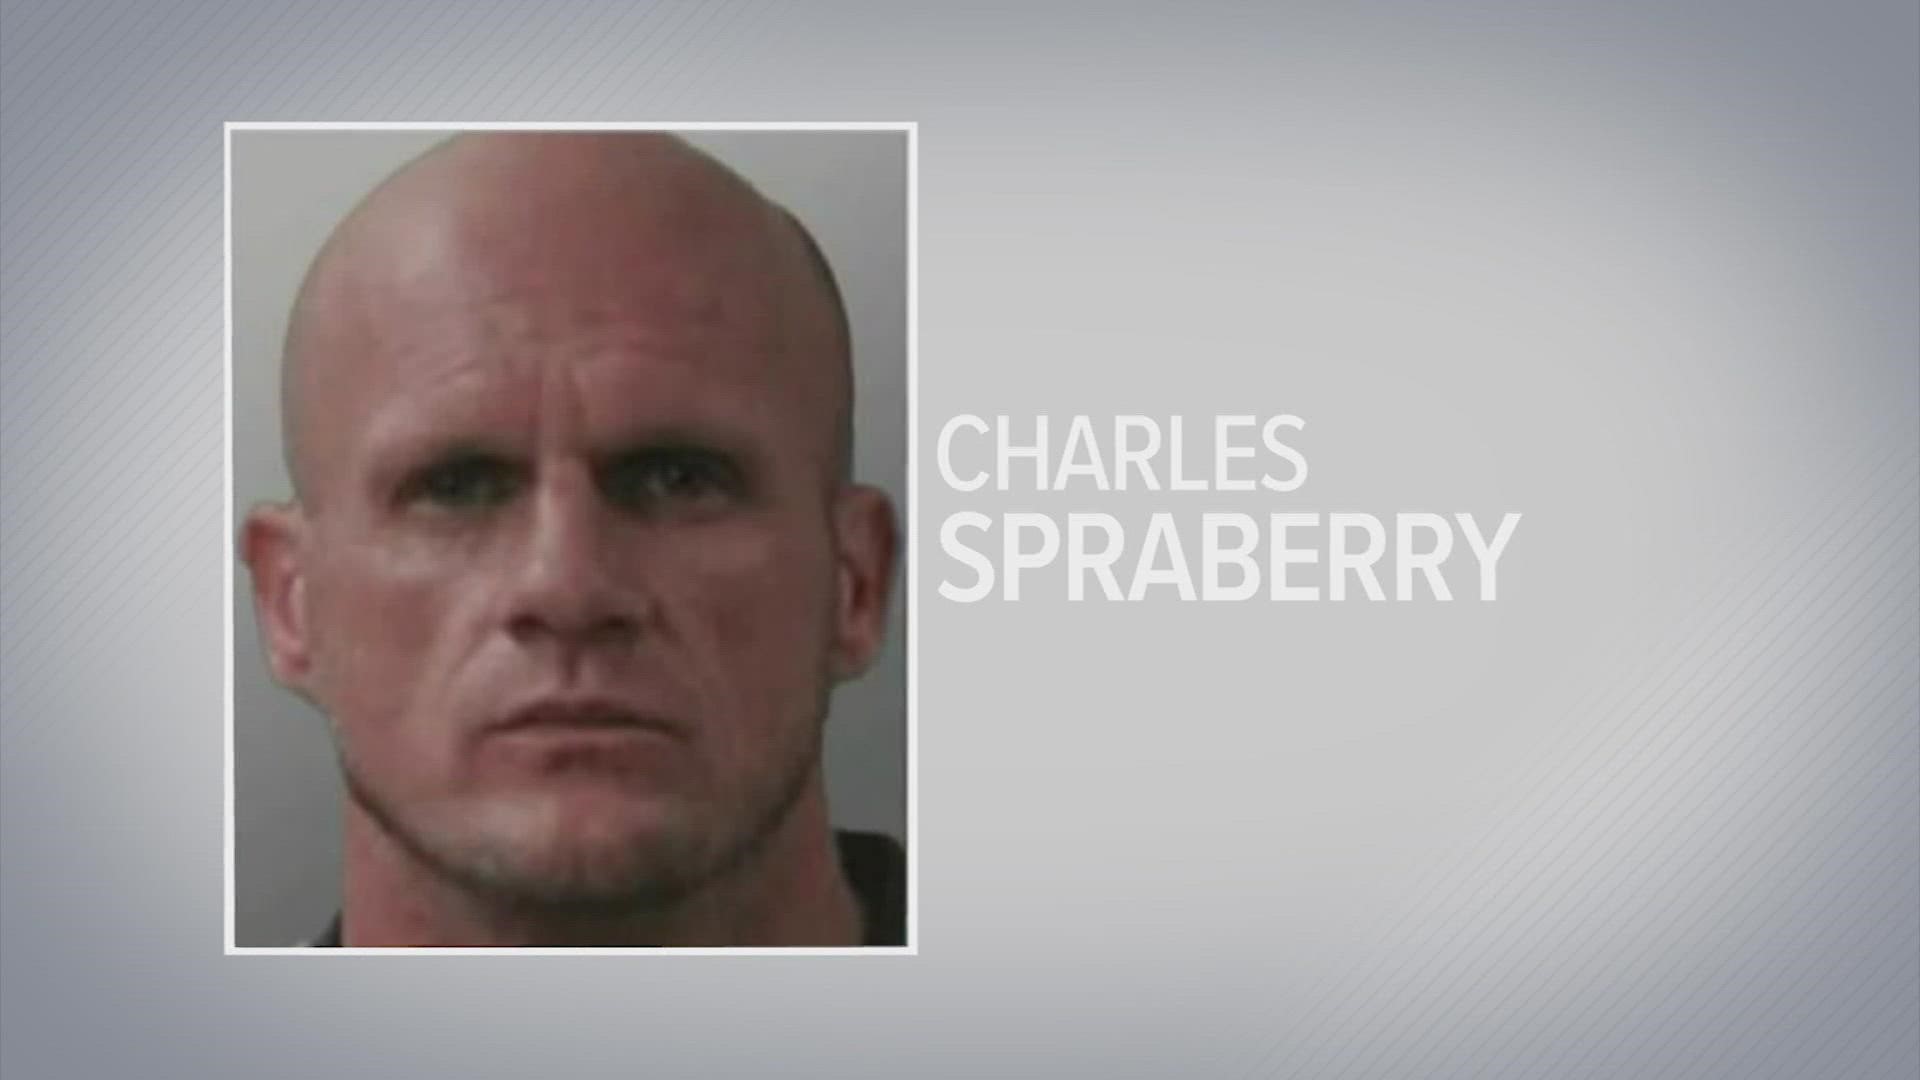 Charles Spraberry escaped from the Cass County Jail on Monday night.